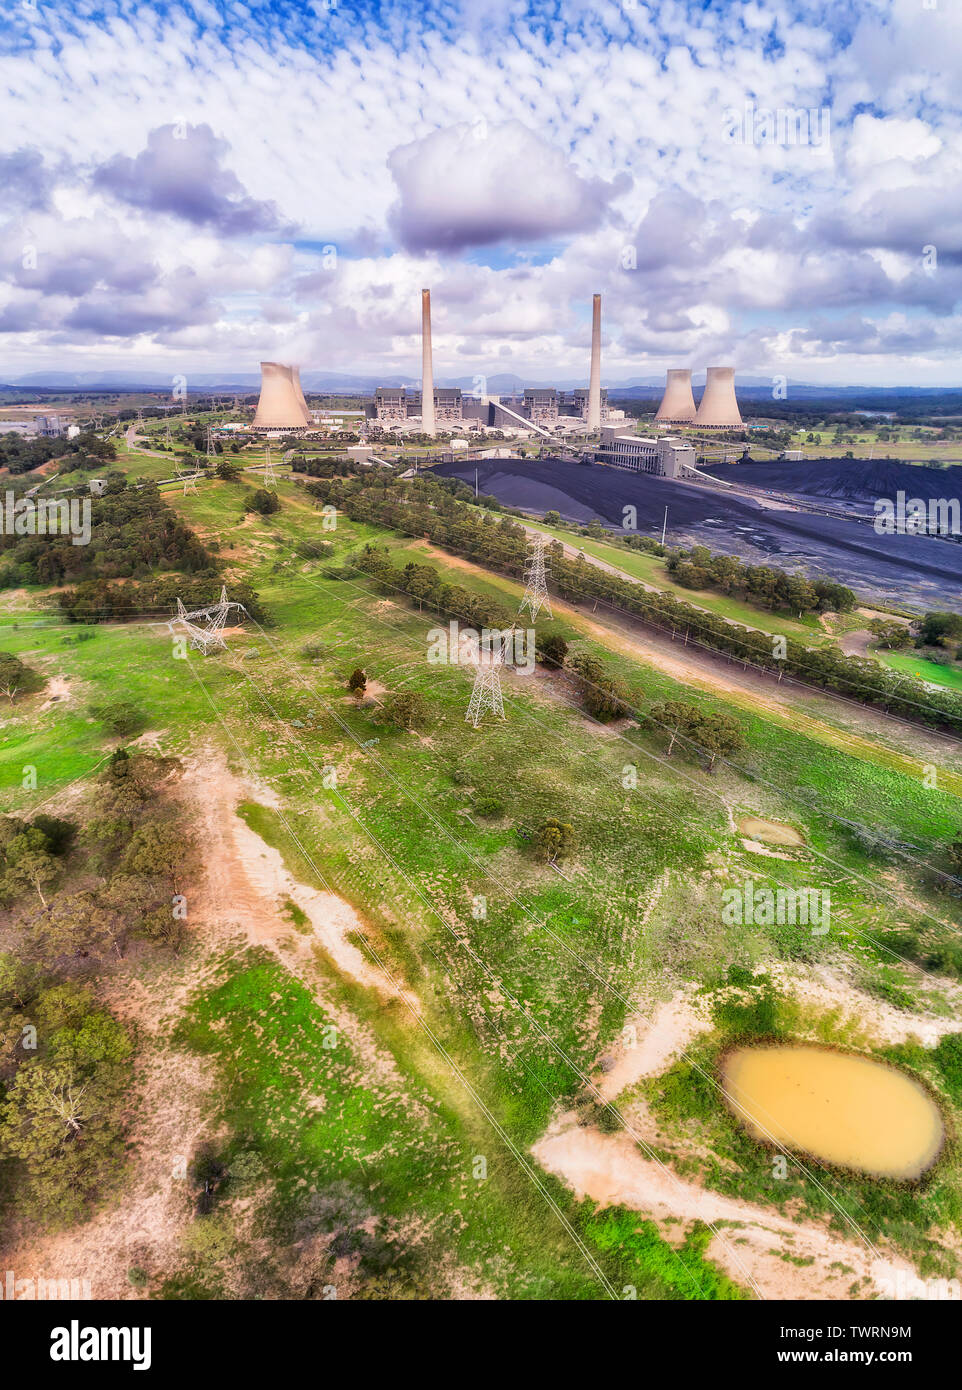 Generation of electrisity by burning black coal fossil fuel at Bayswater power station in Liddell. Vertical aerial panorama over ground landscape up t Stock Photo